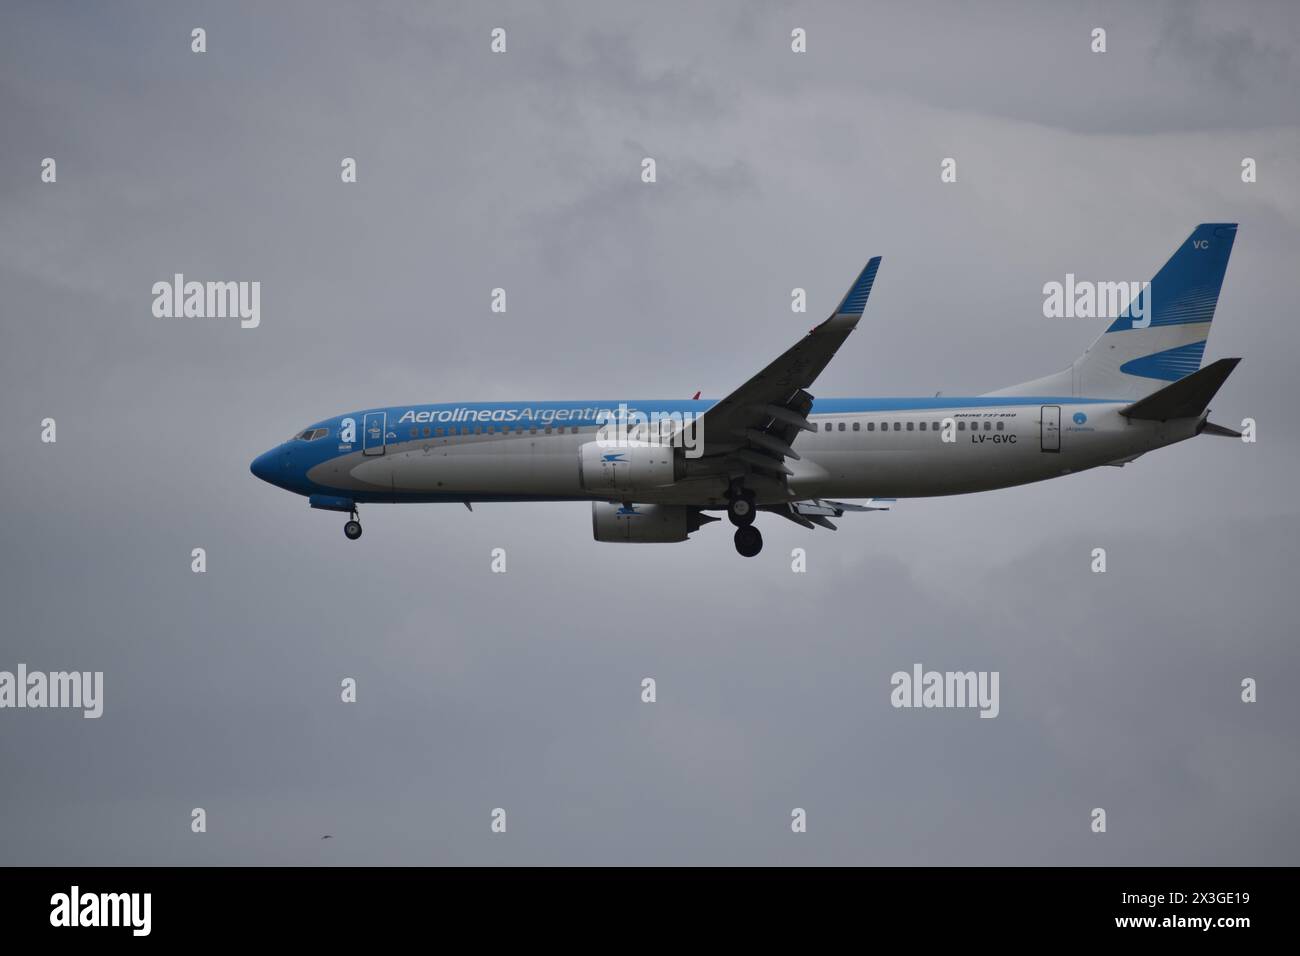 Boeing 737 airplane of Aerolineas Argentinas airline approaching Buenos Aires airport Stock Photo